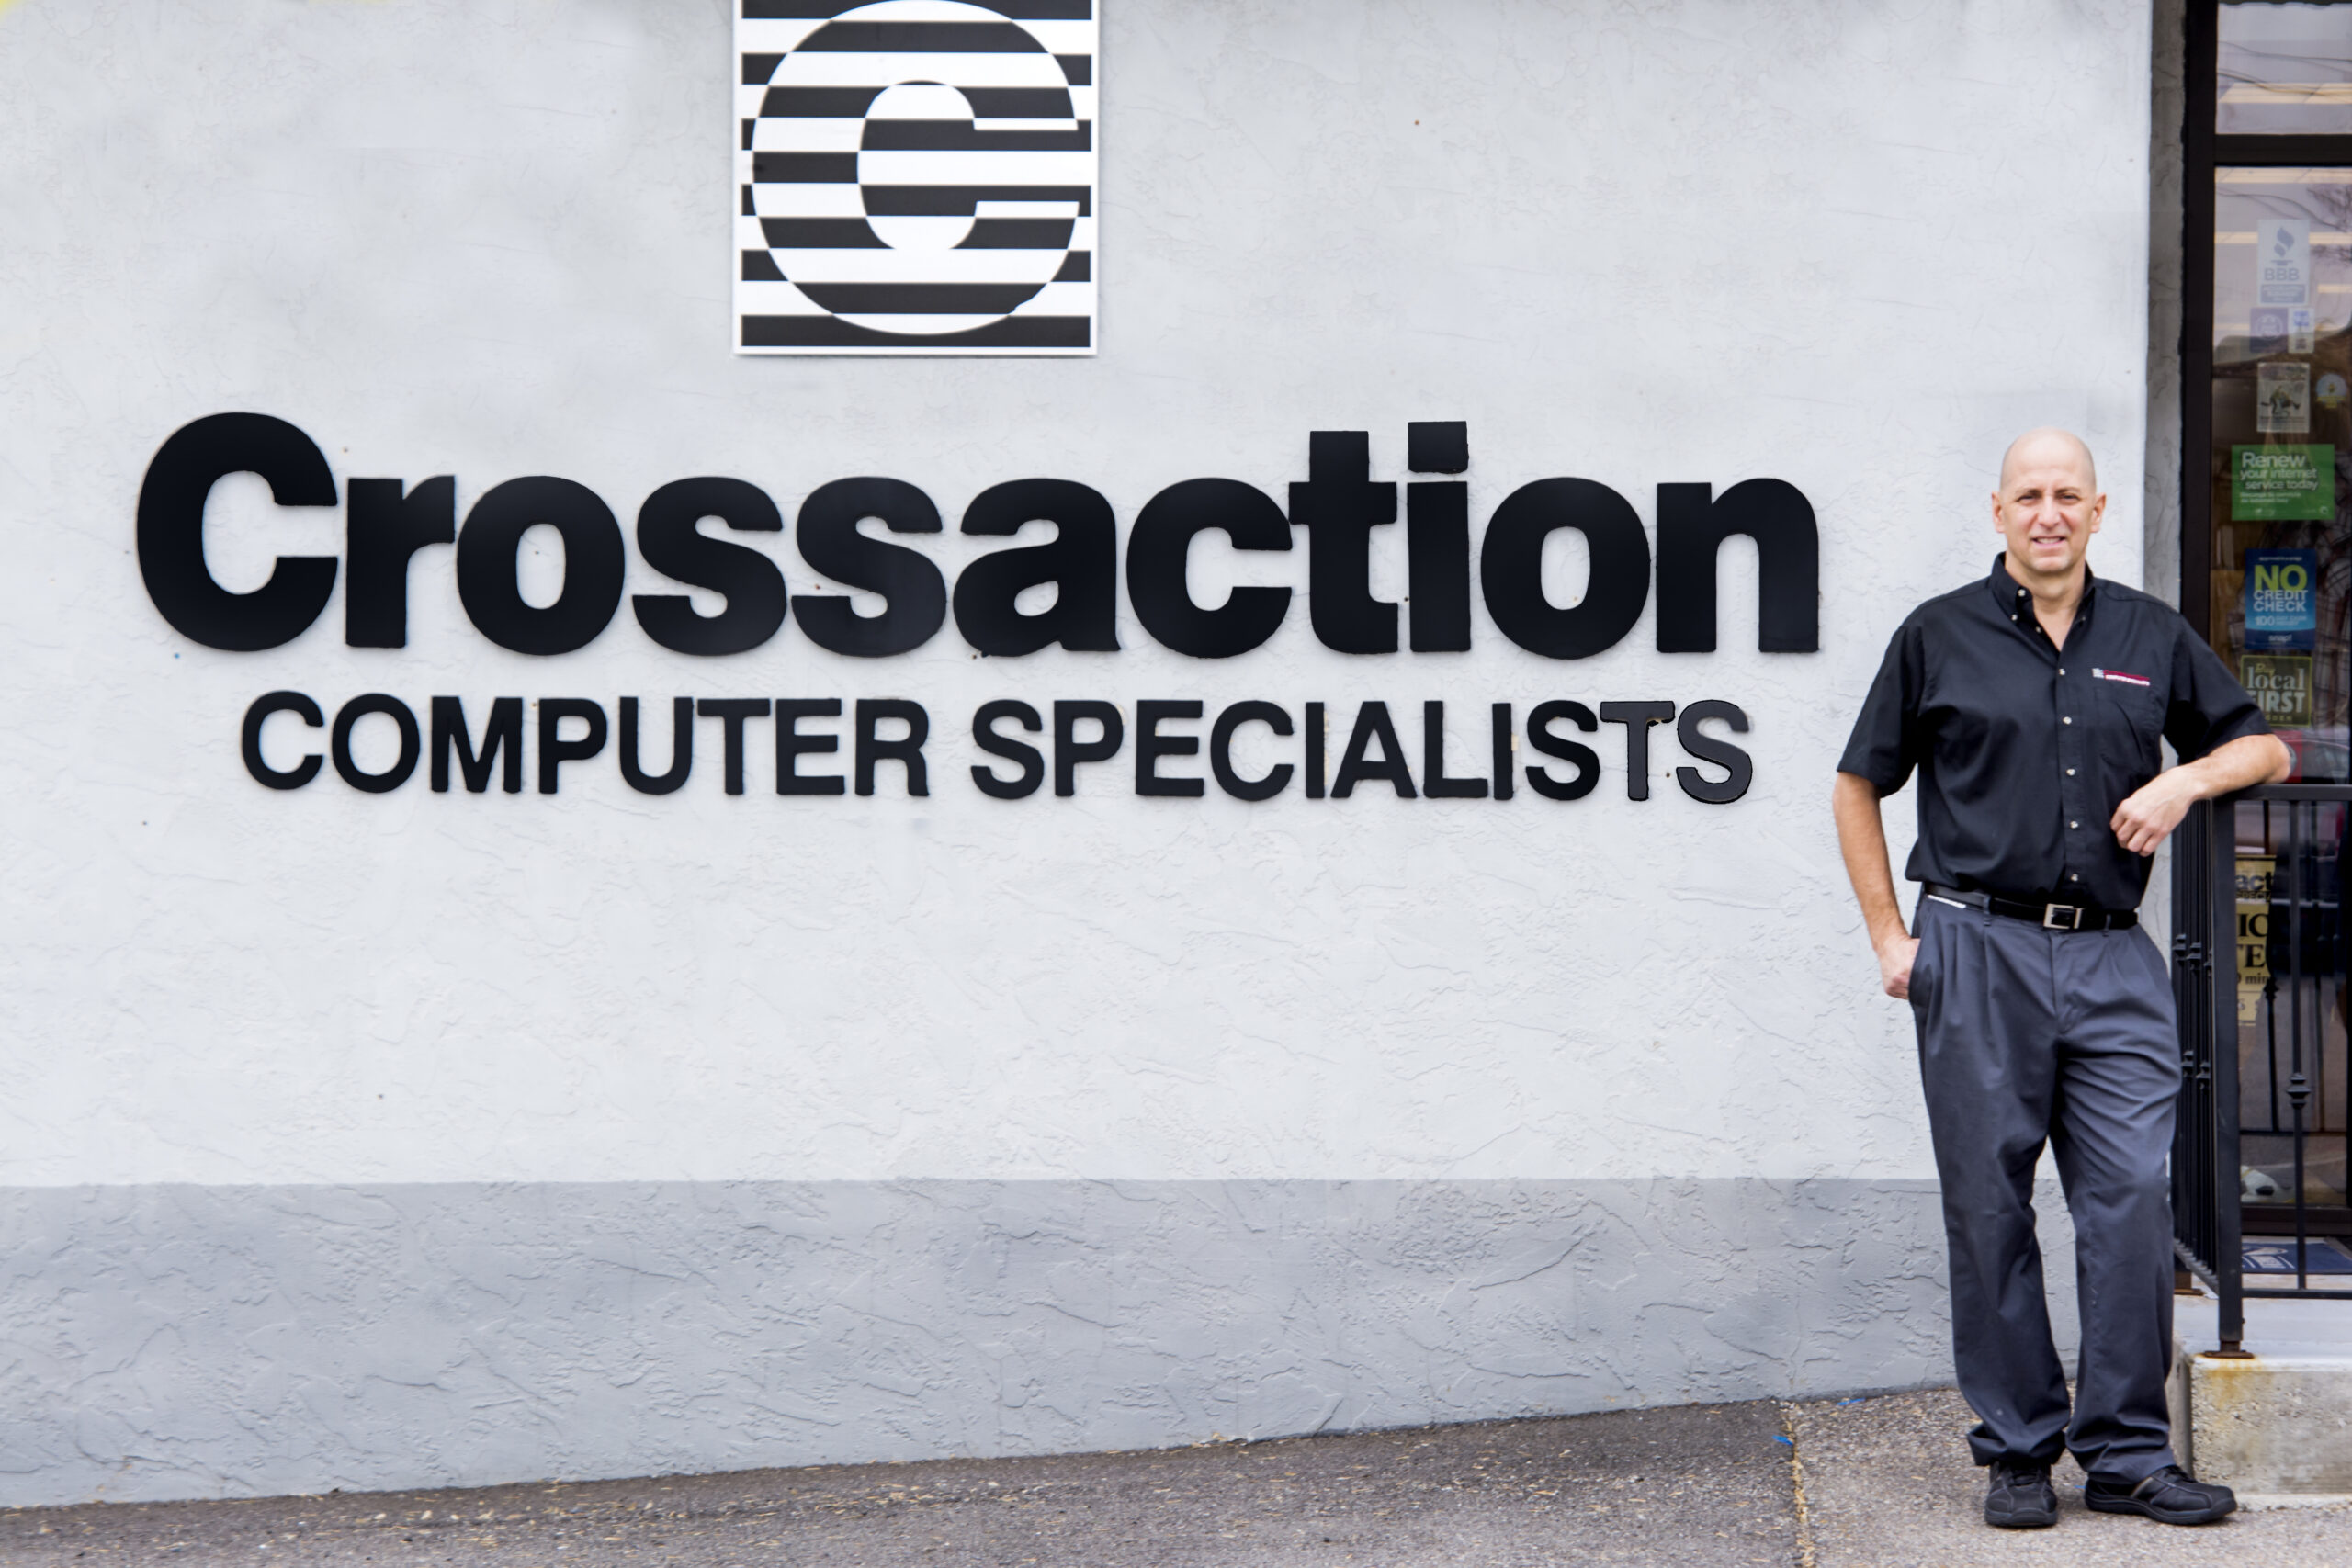 About Crossaction Business IT Specialists Ogden UT Managed IT Services